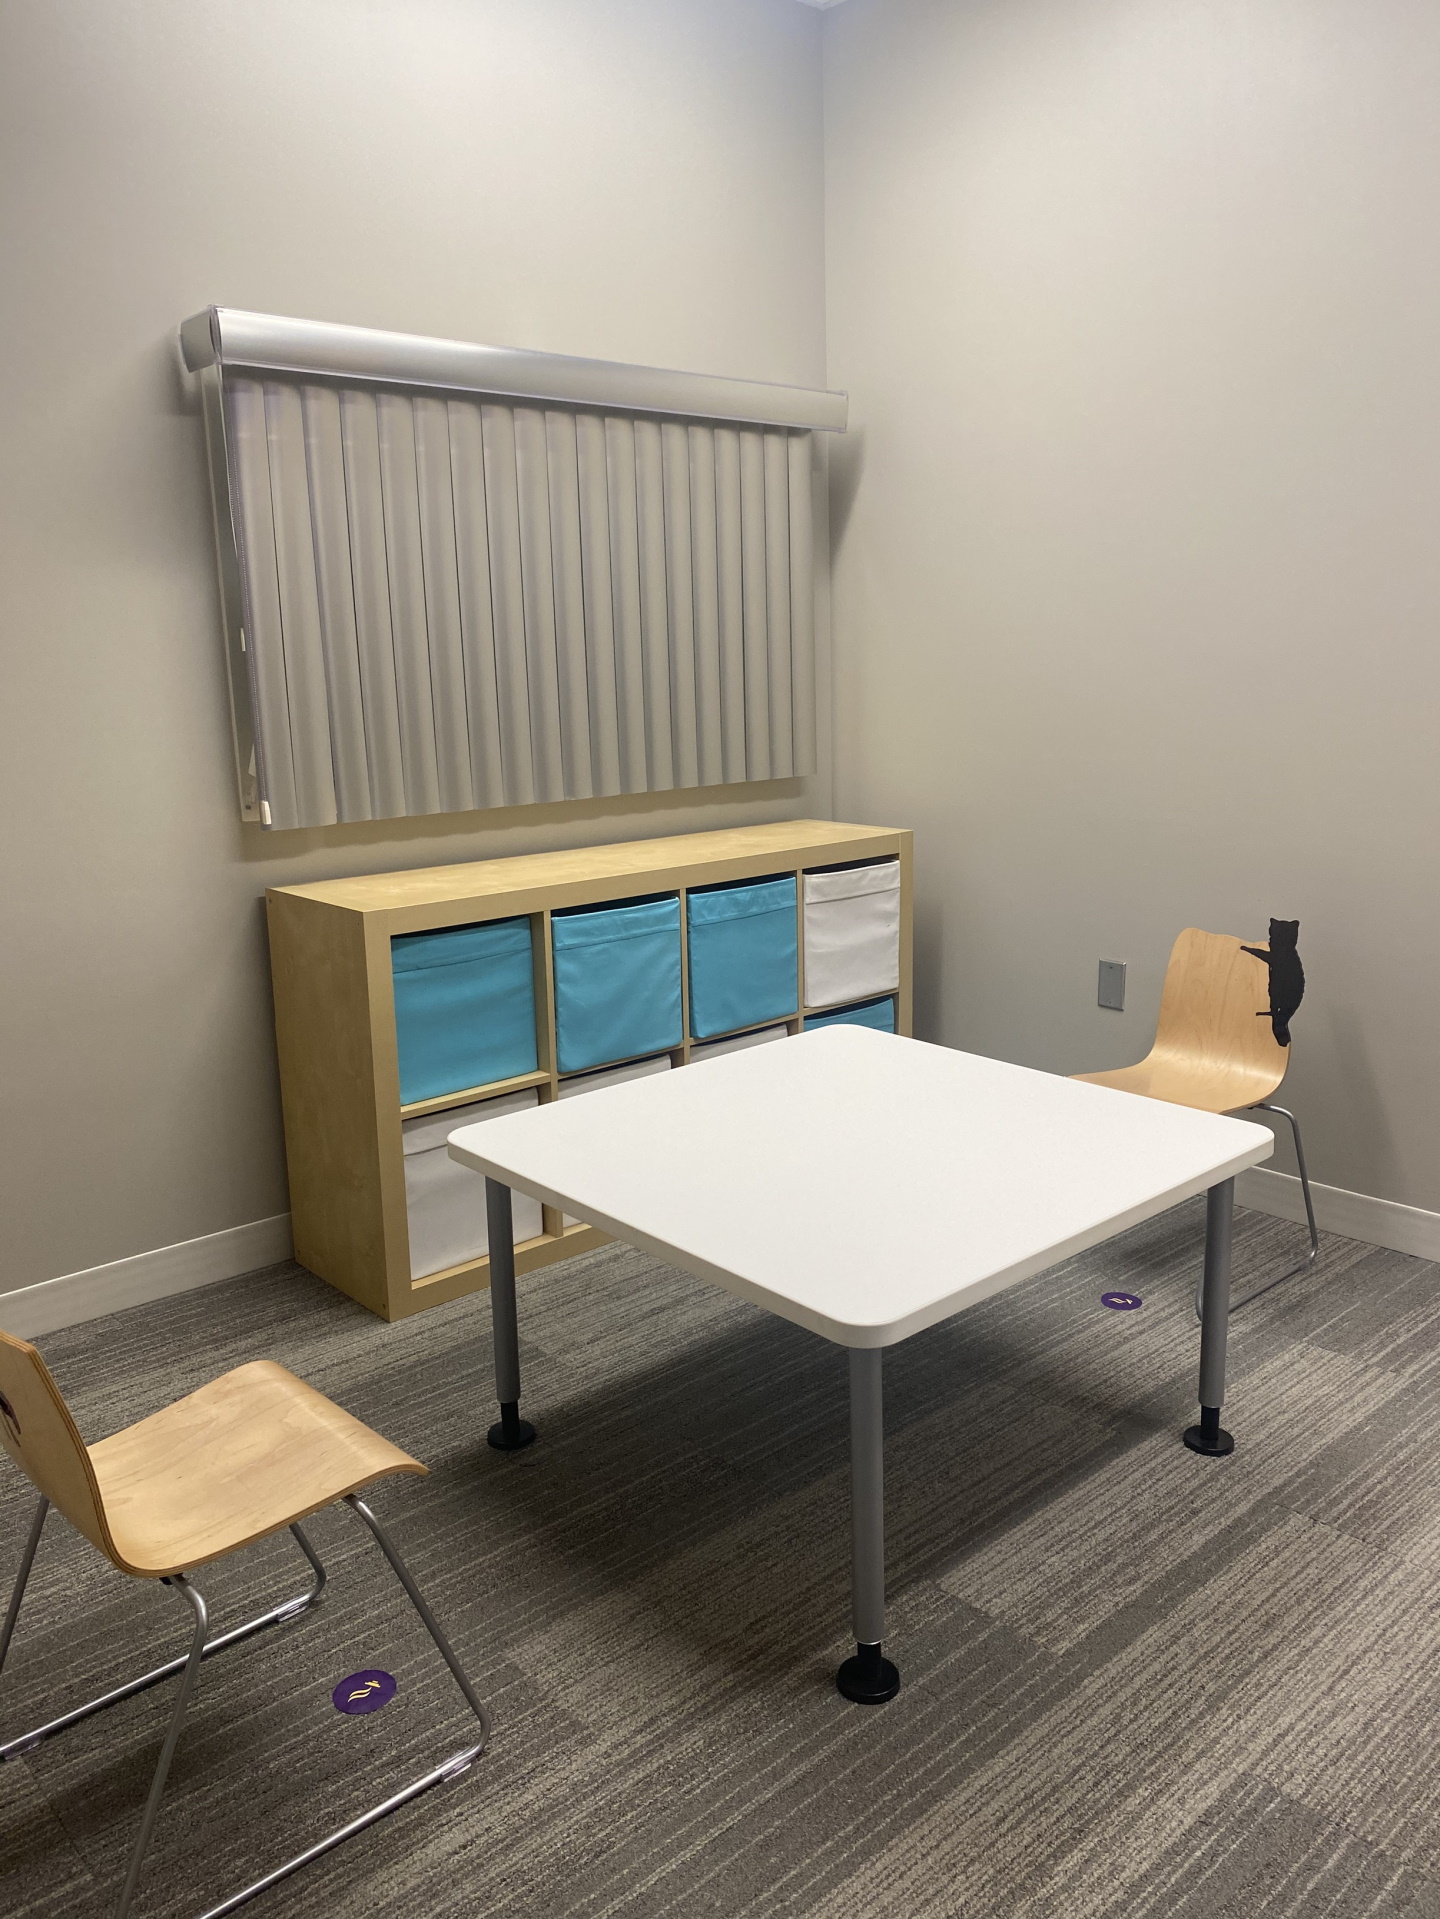 Child therapy room  table and chairs